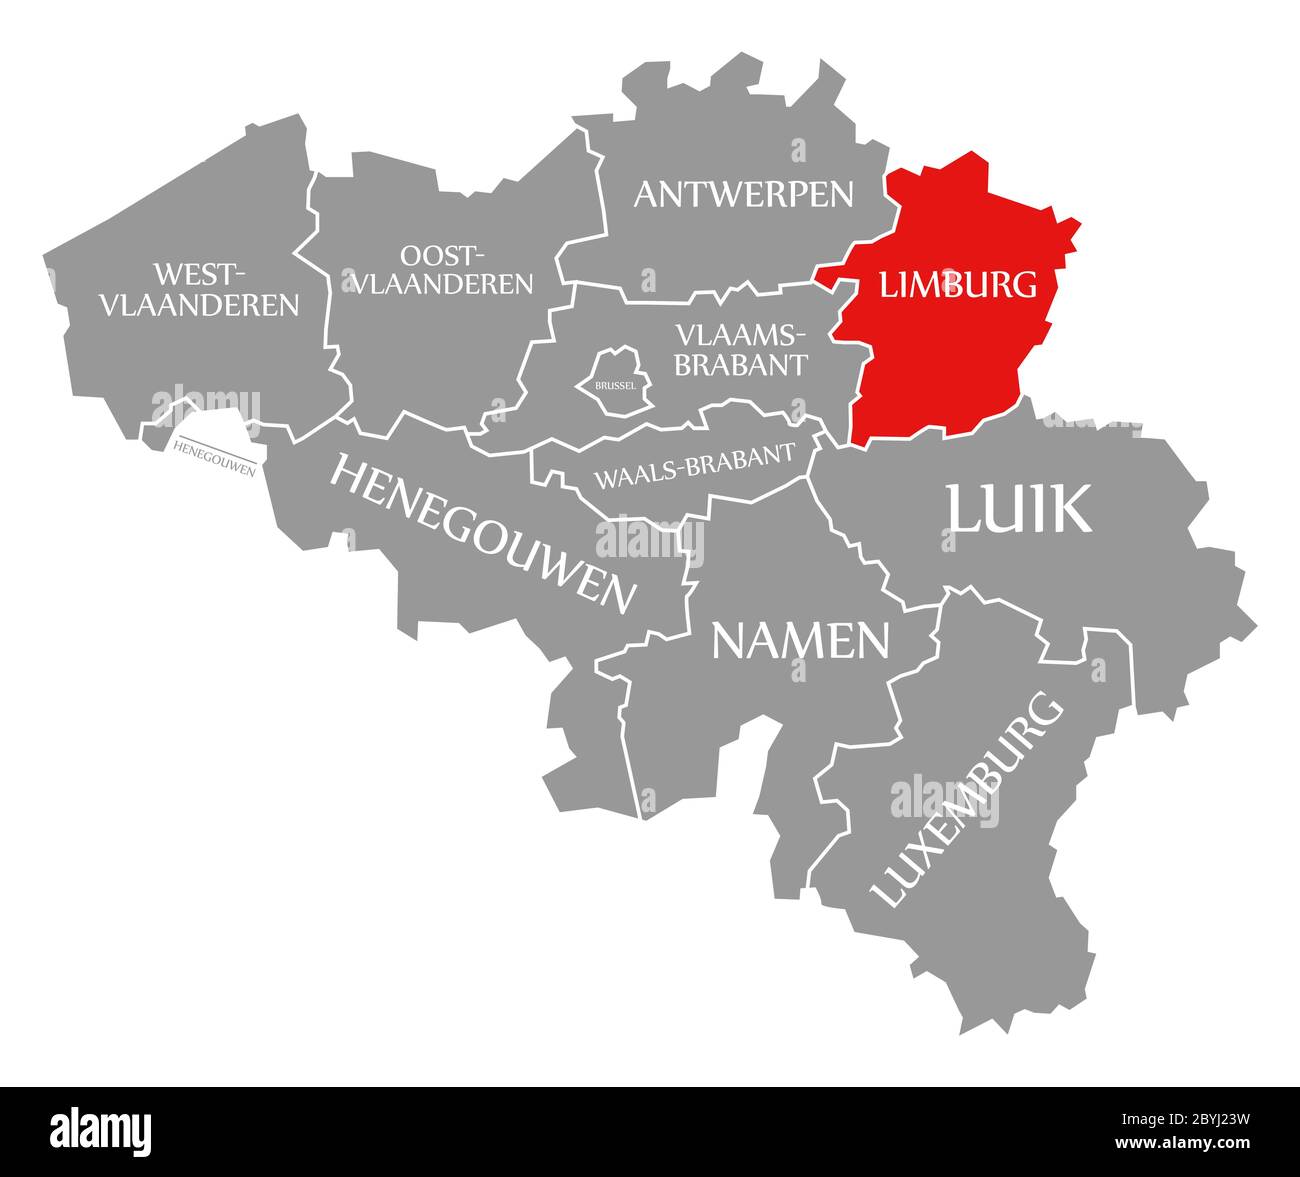 Limburg red highlighted in map of Belgium Stock Photo